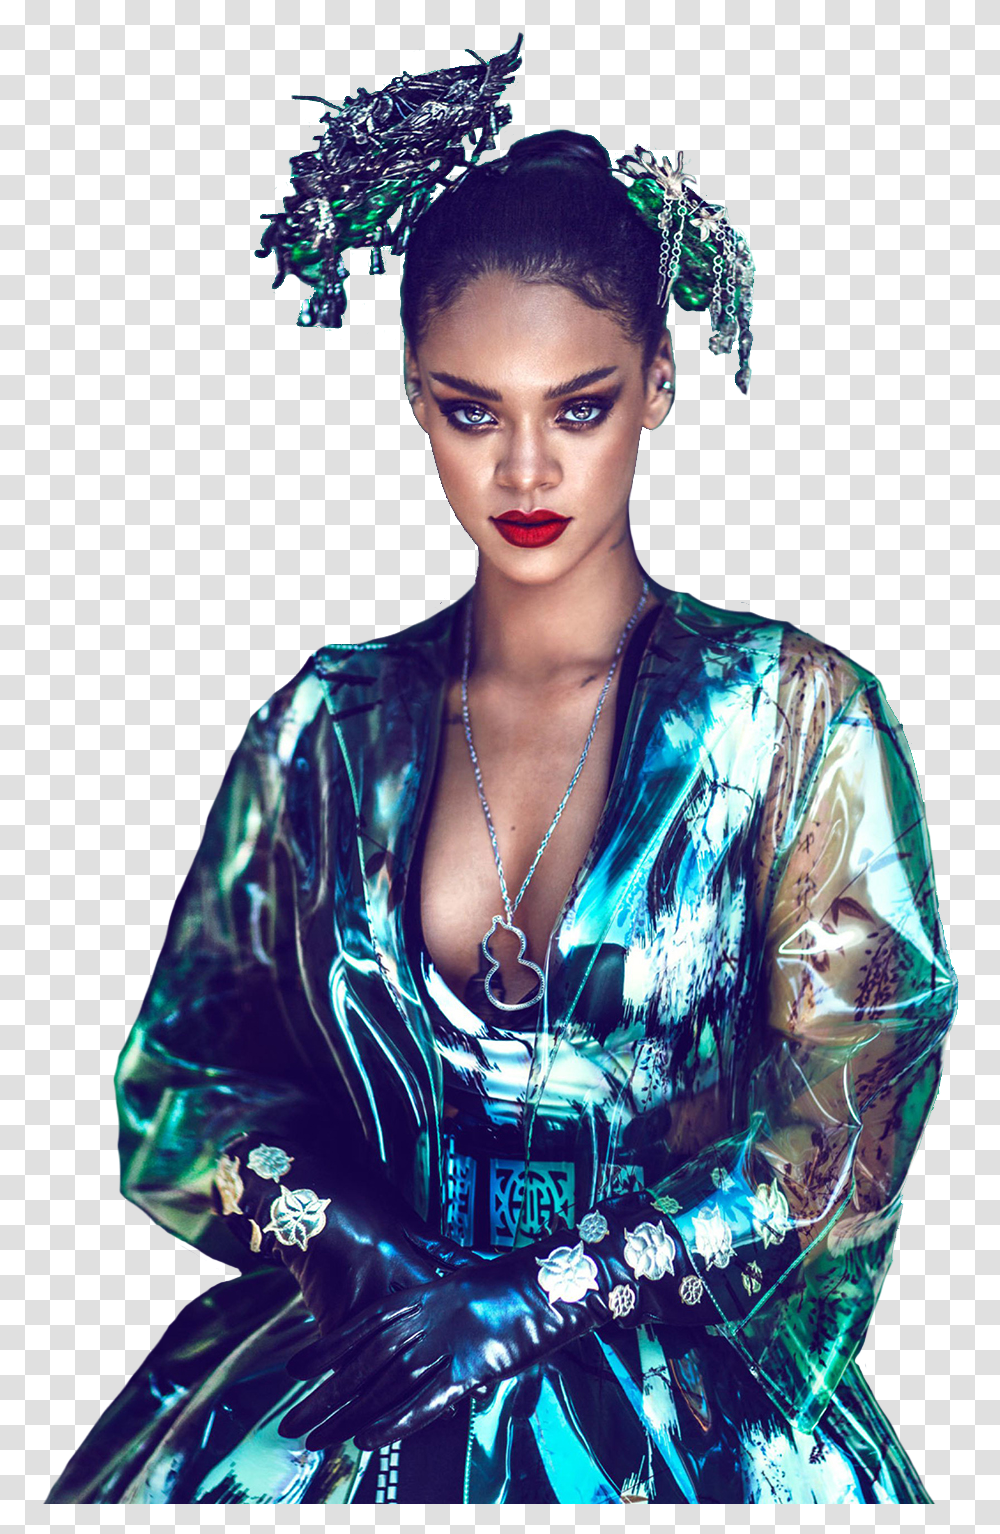 Rihanna Background Rihanna Background, Clothing, Face, Person, Necklace Transparent Png